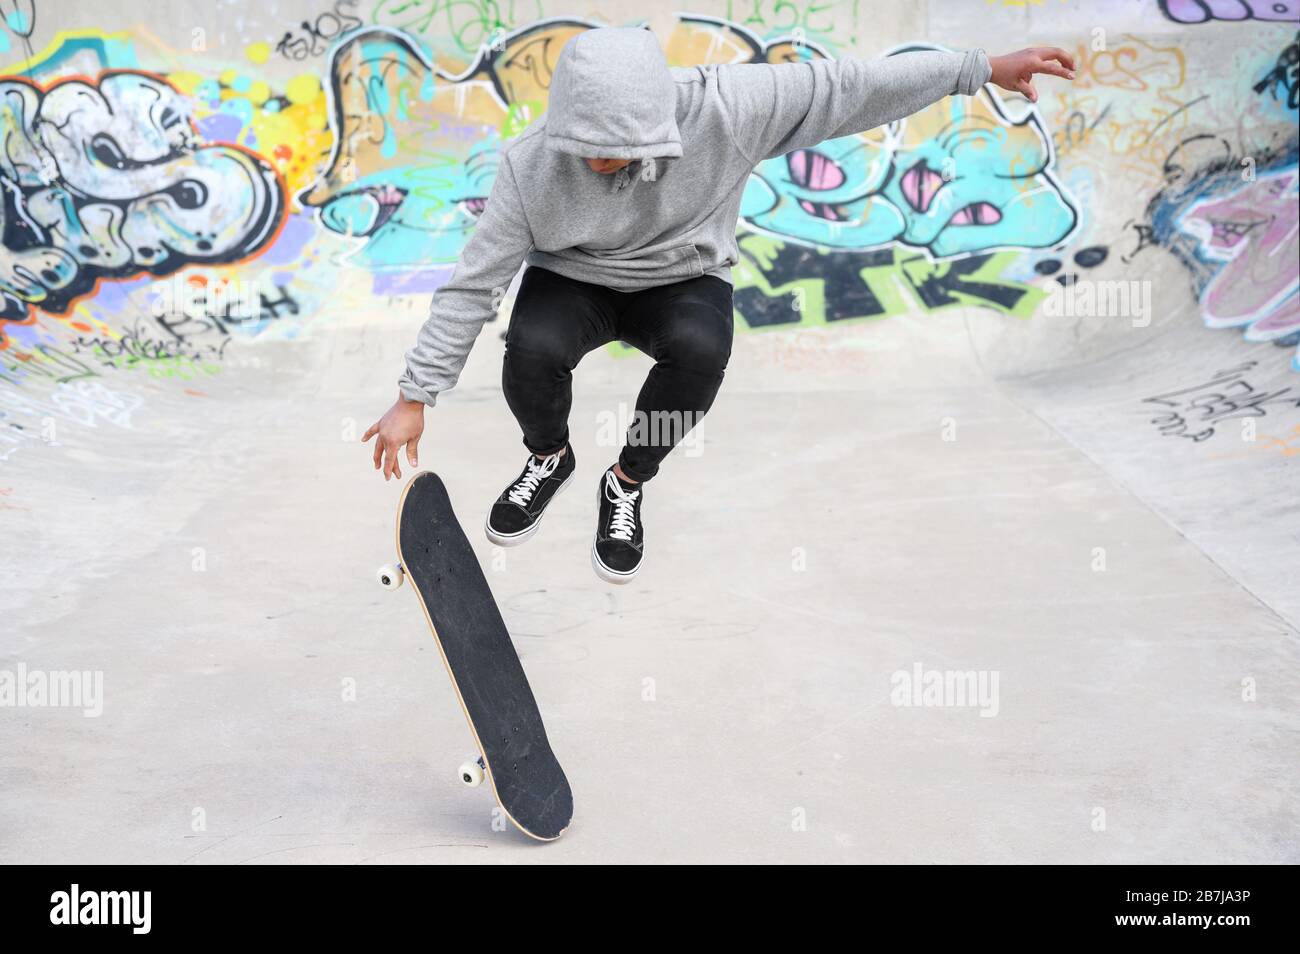 young skater doing jump trick at skate park . Stock Photo